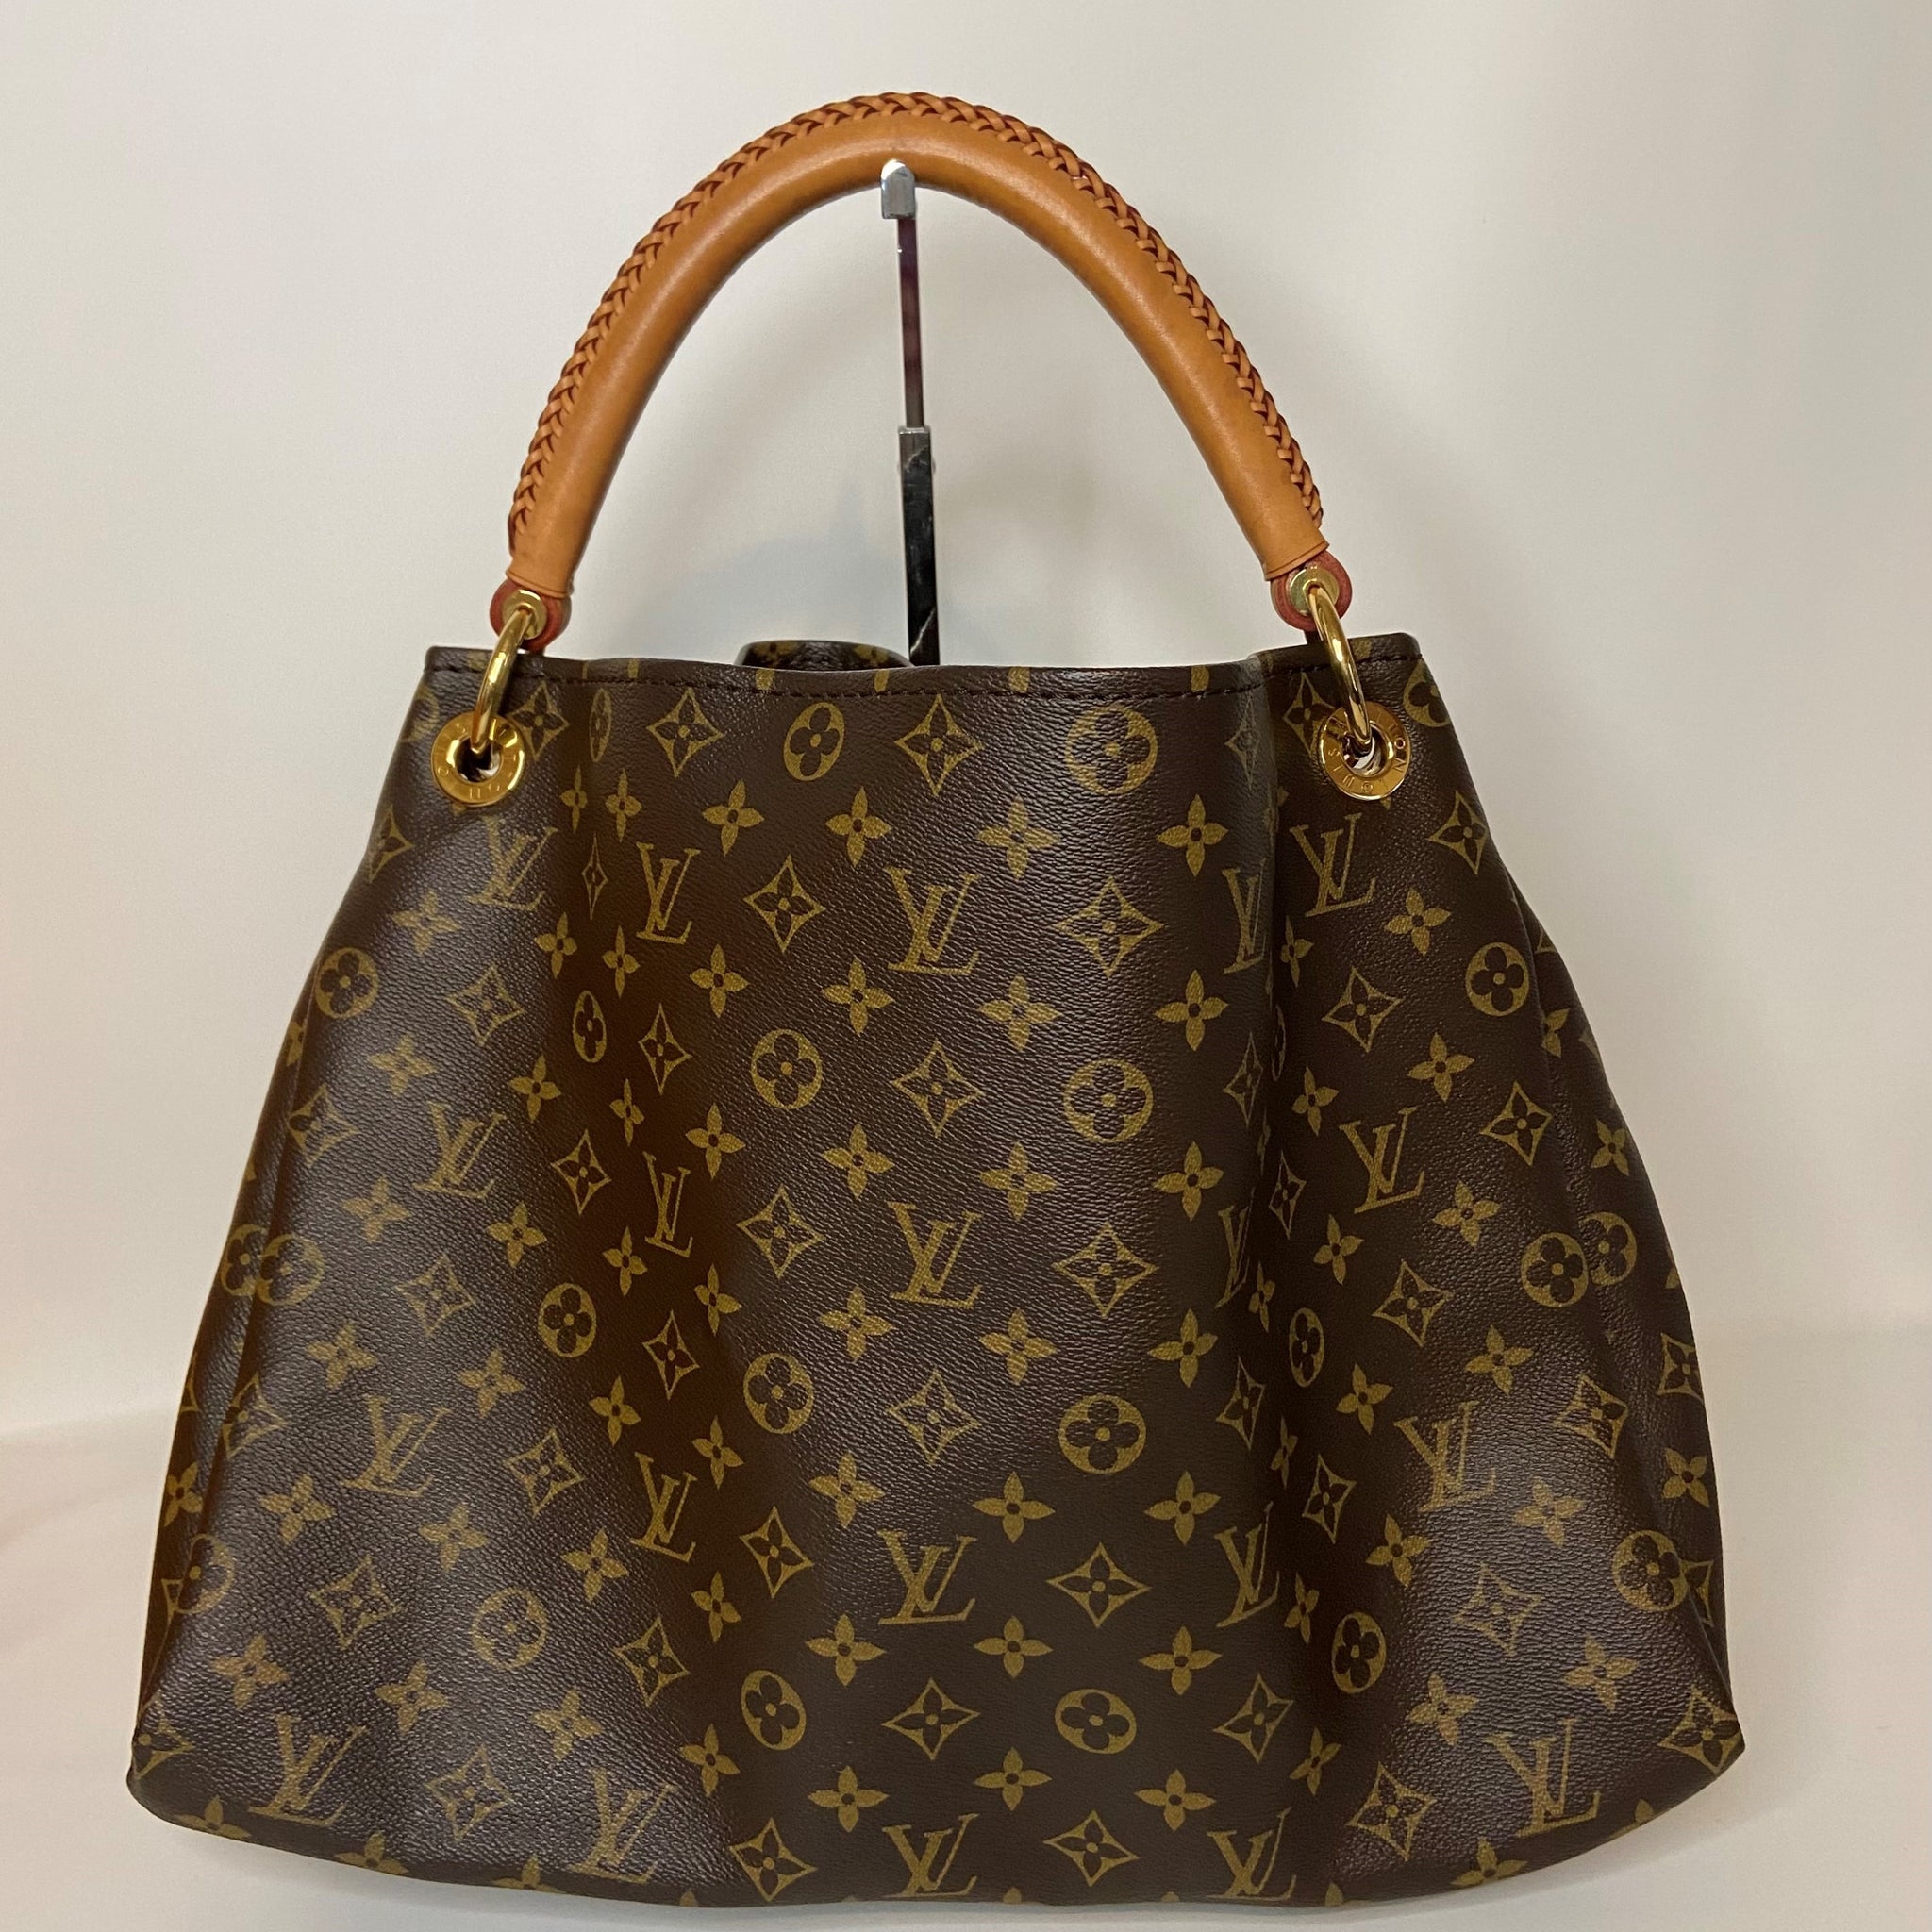 Difference Between Louis Vuitton Artsy Mm And Gm